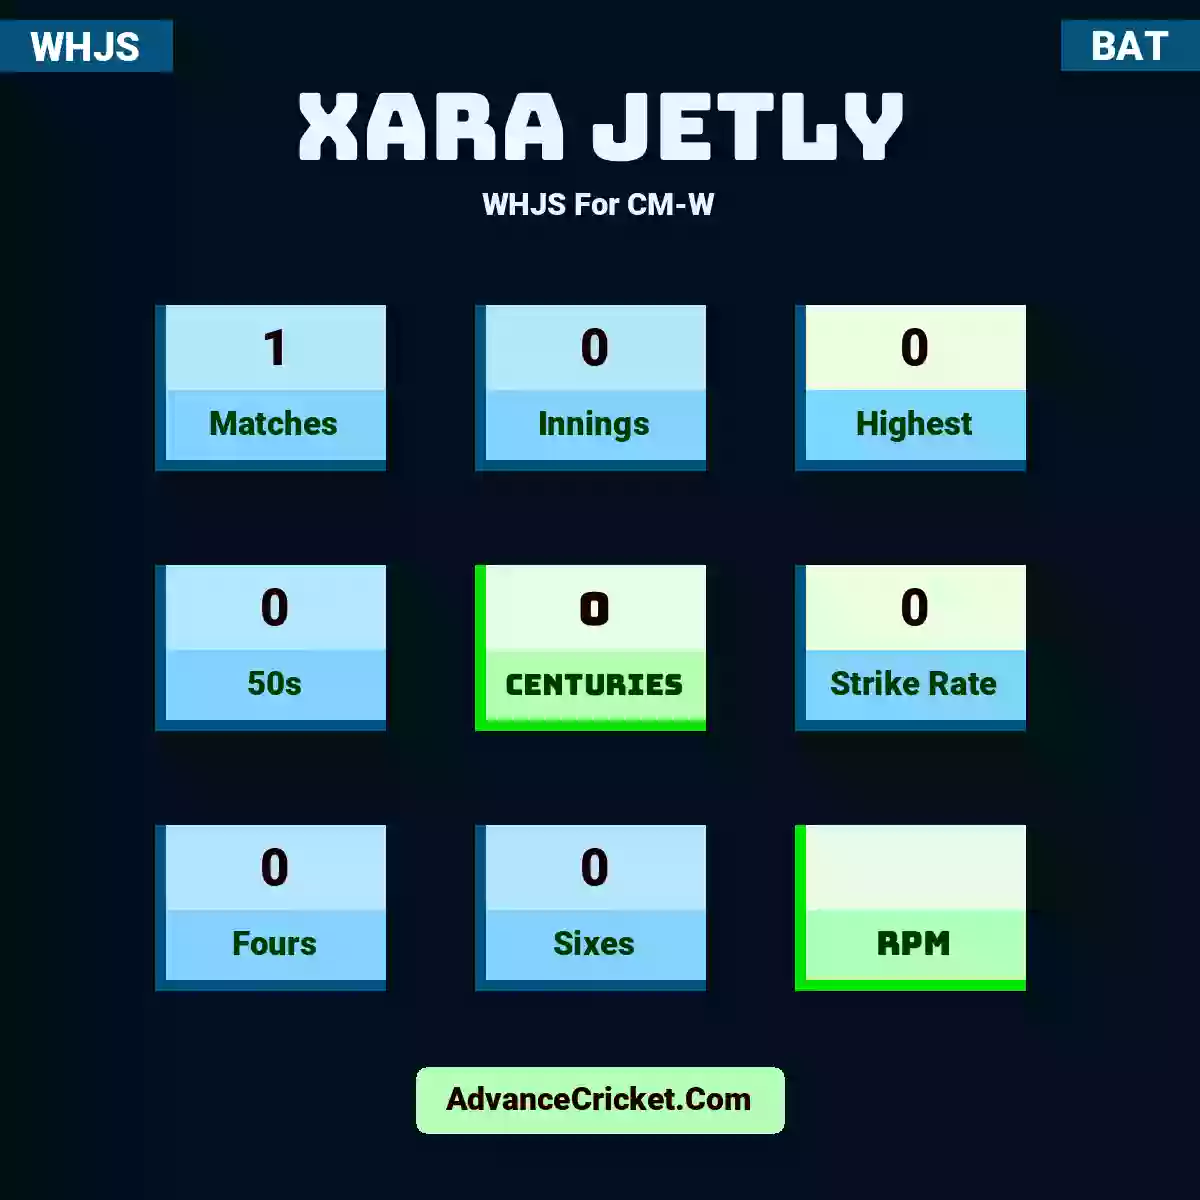 Xara Jetly WHJS  For CM-W, Xara Jetly played 1 matches, scored 0 runs as highest, 0 half-centuries, and 0 centuries, with a strike rate of 0. X.Jetly hit 0 fours and 0 sixes.